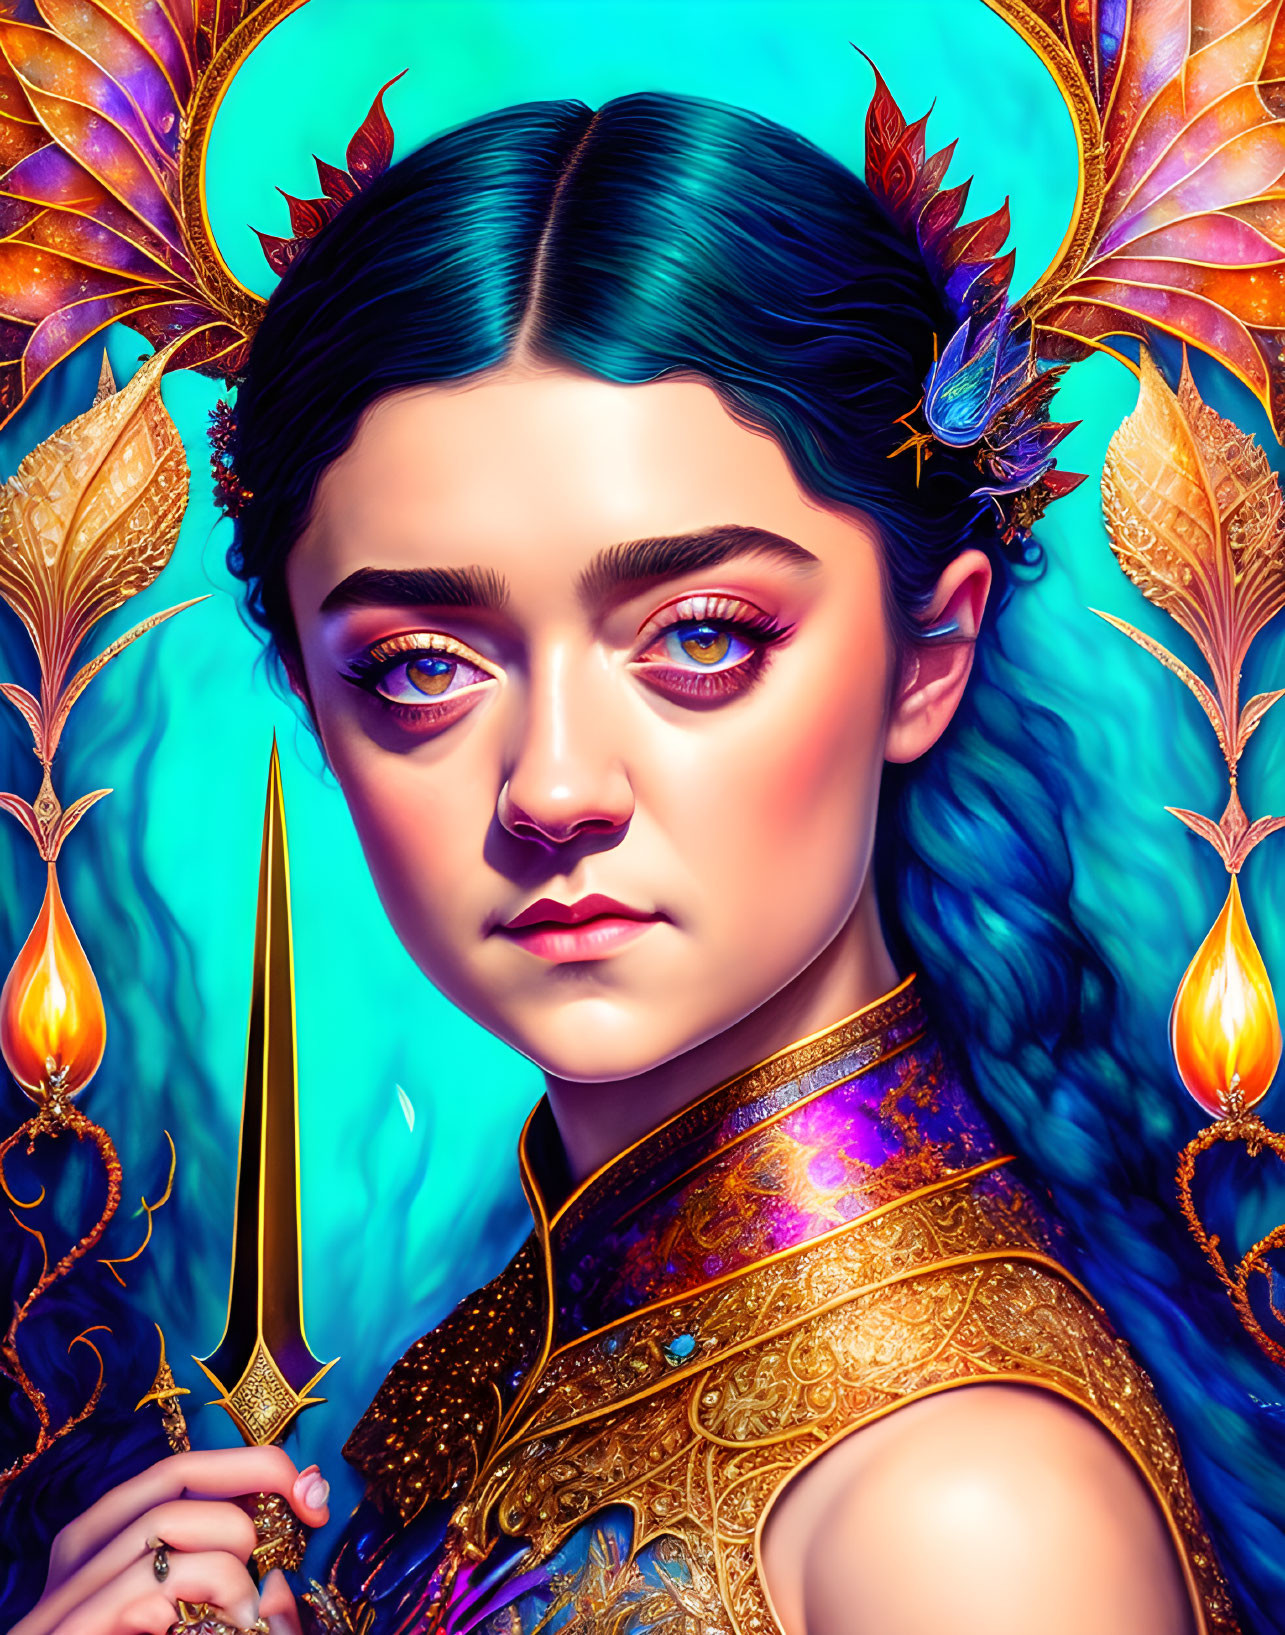 Fantasy digital artwork: Woman in crown, armor, dagger on turquoise background.